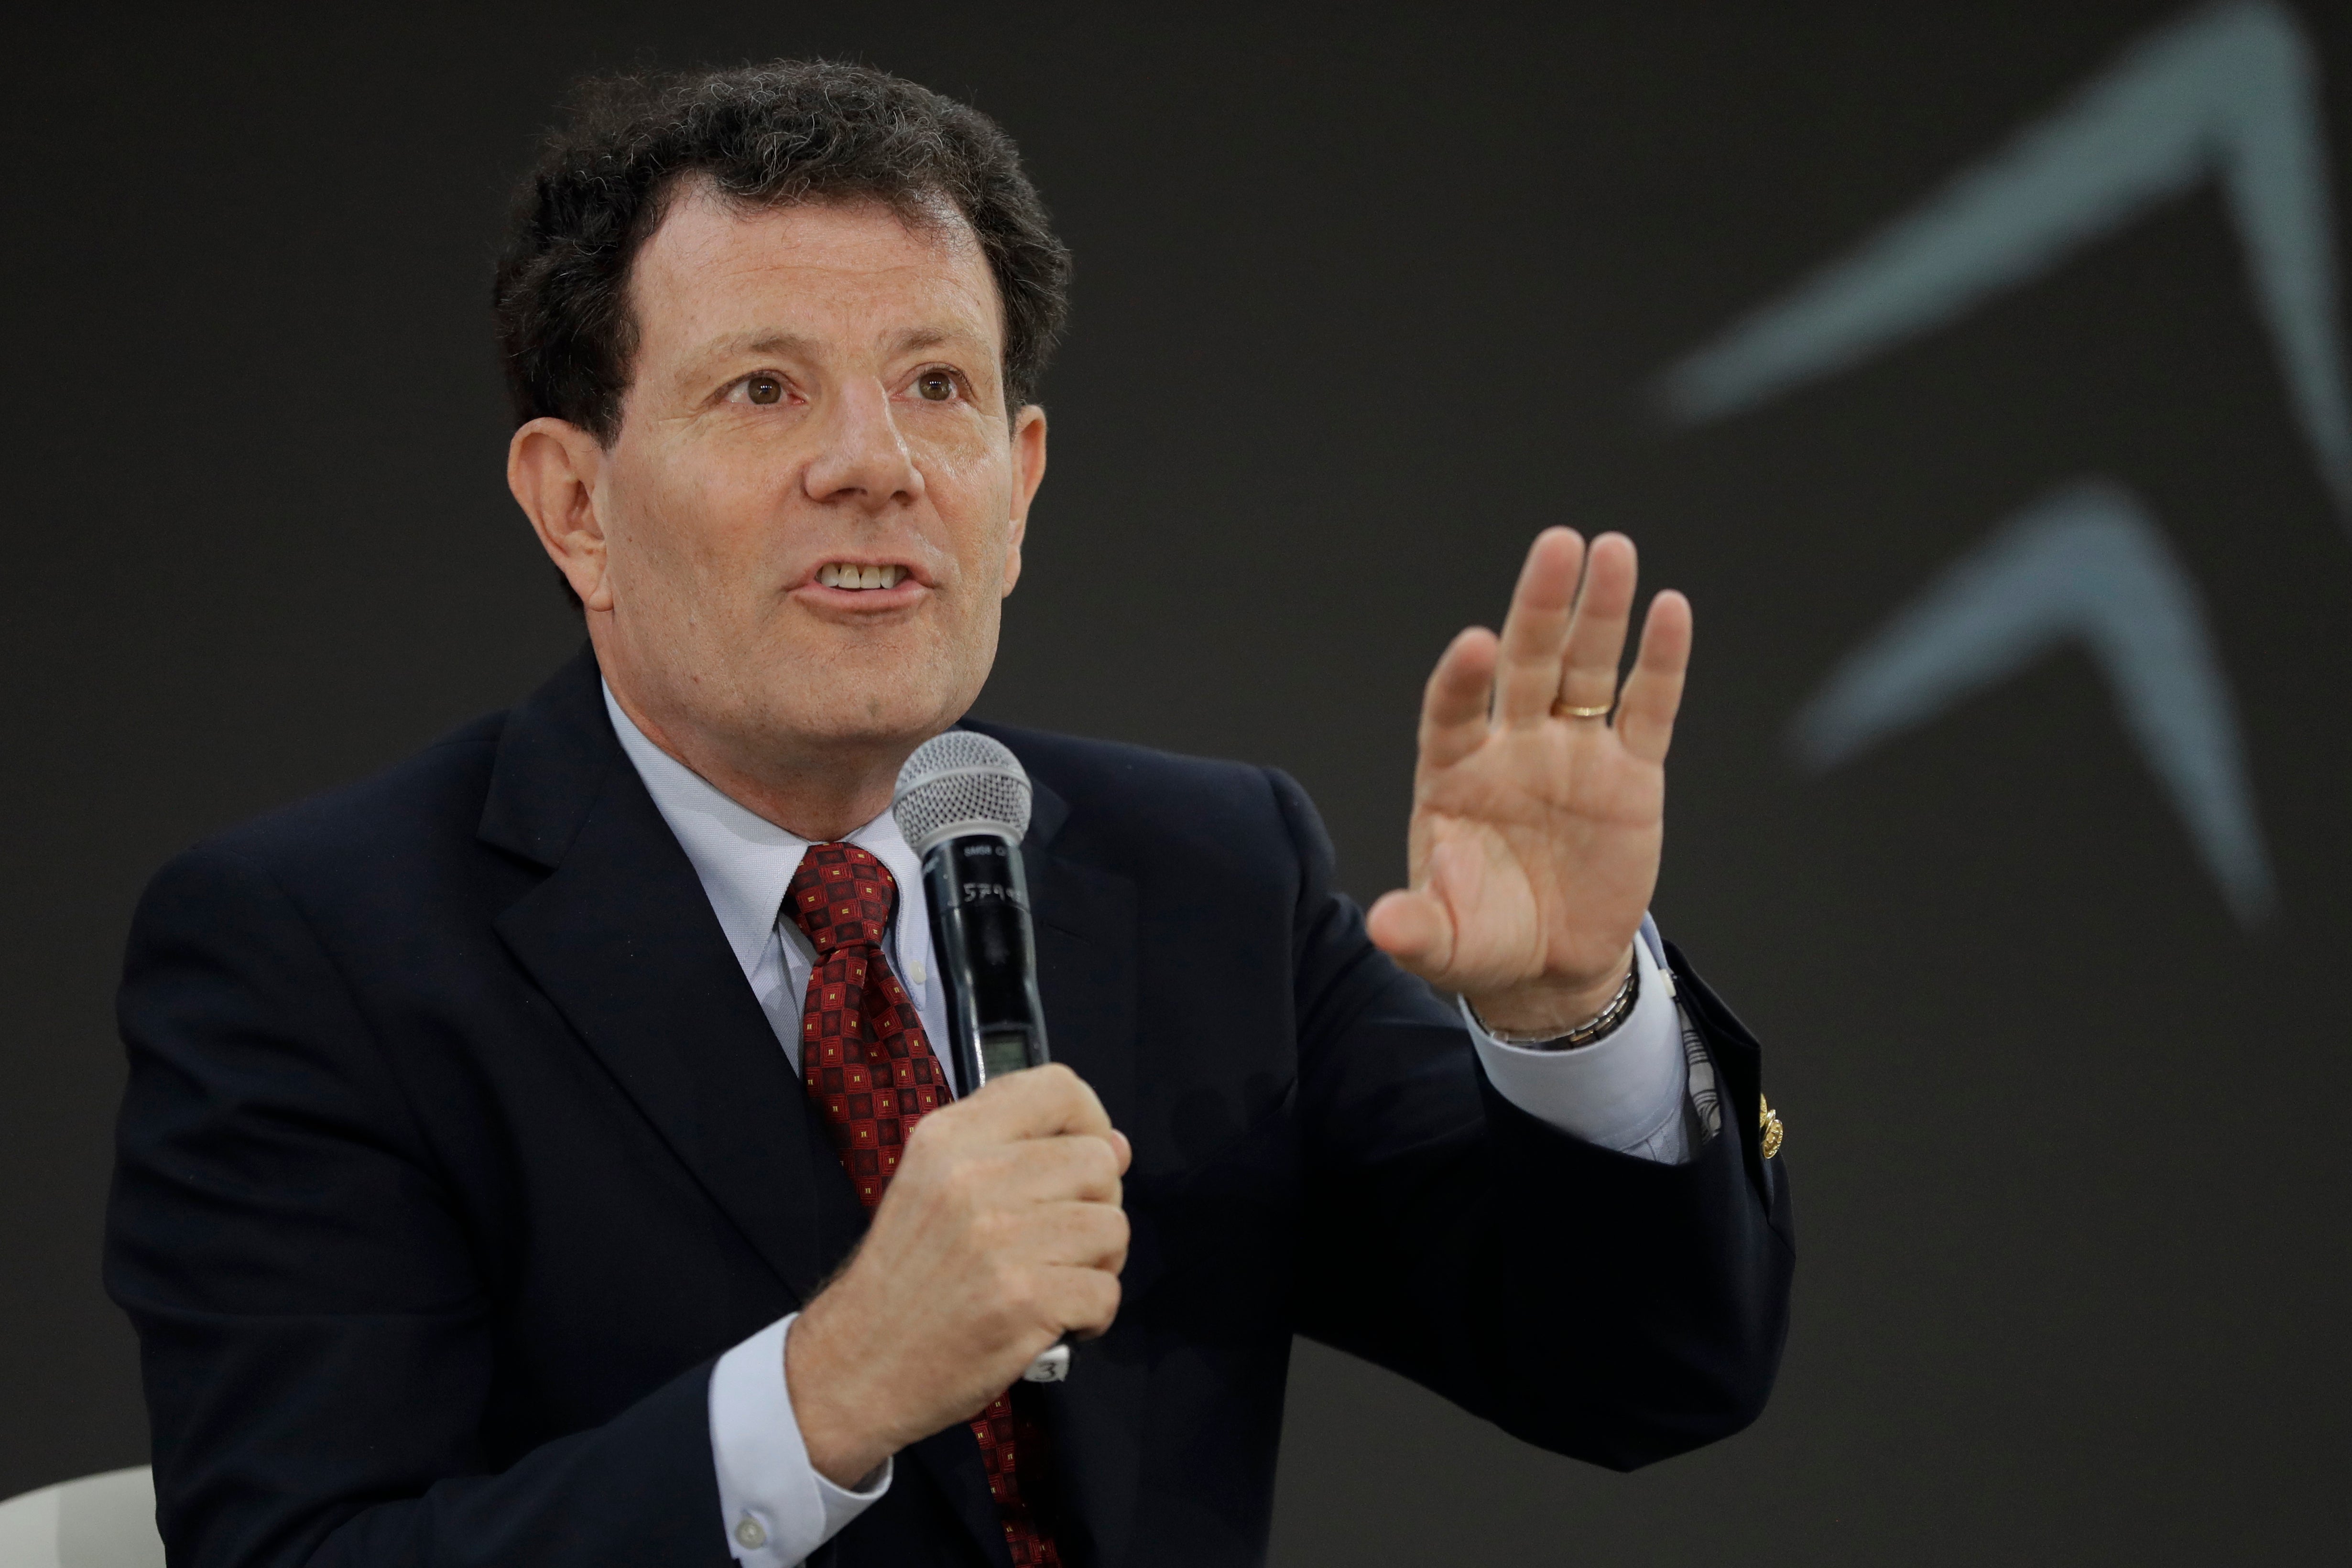 Kristof is running for Oregon governor and has left his NY Times columnist job to pursue the race